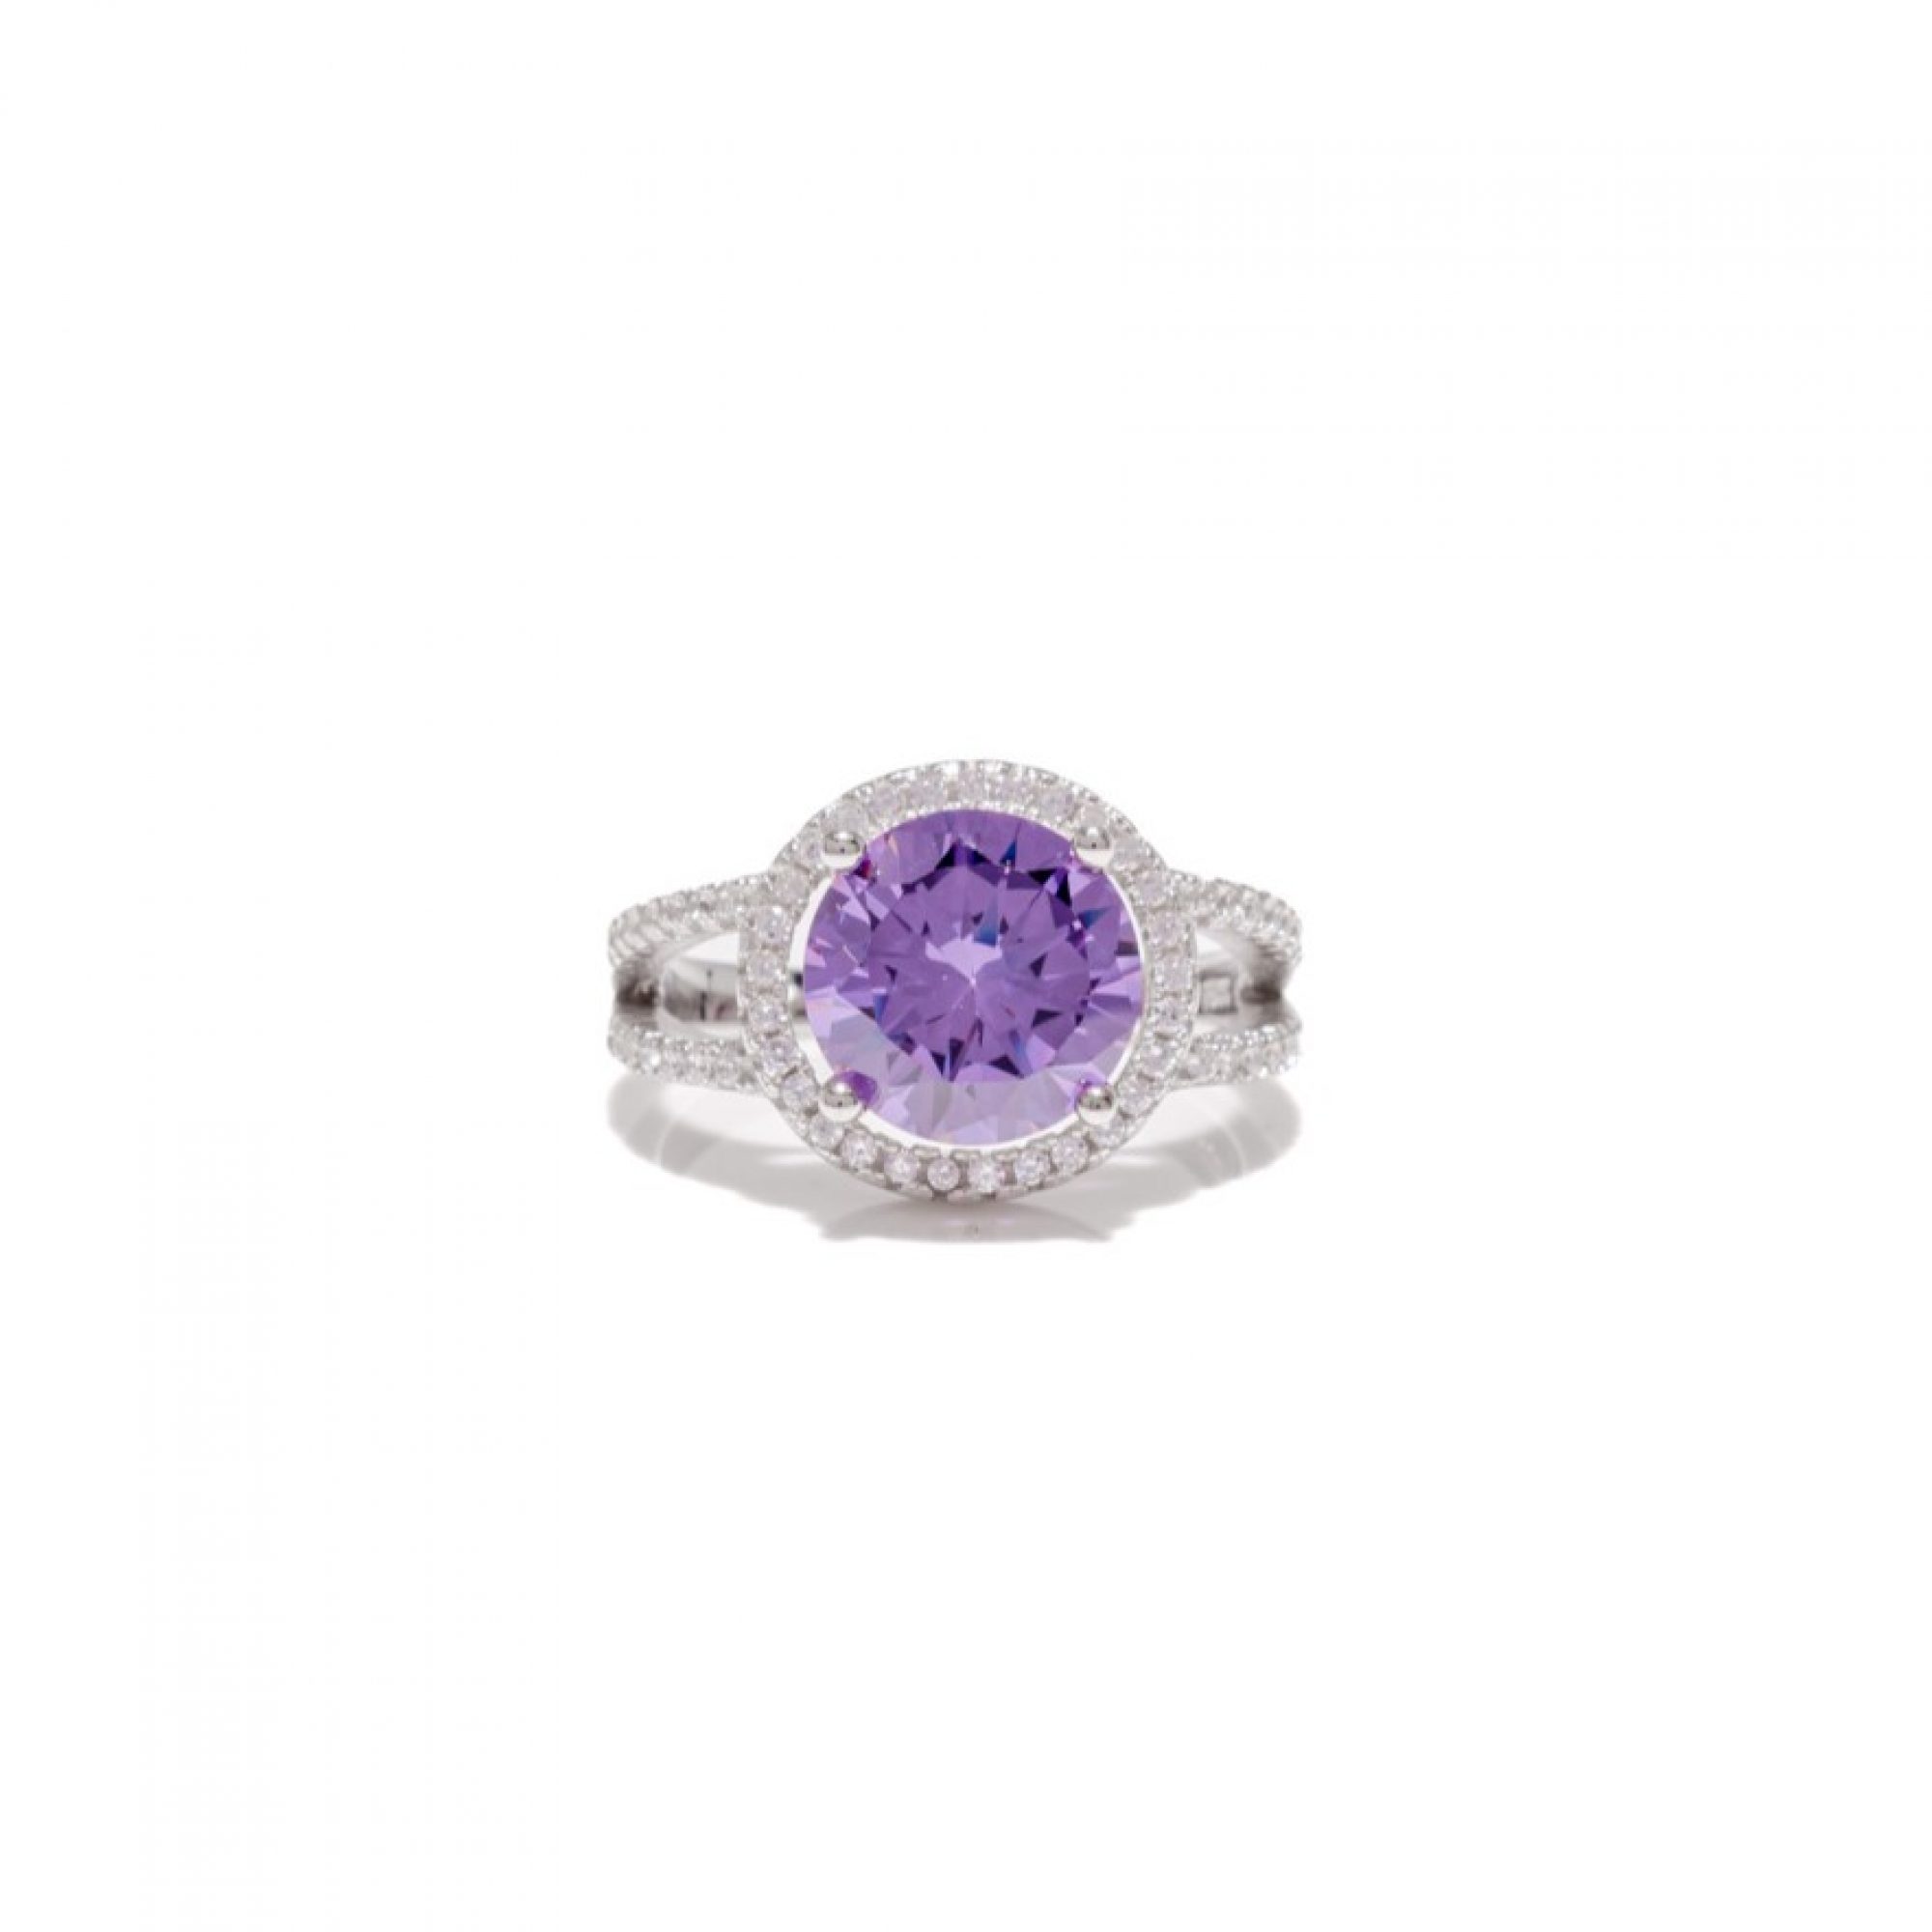 Ring with amethyst and zircon stones